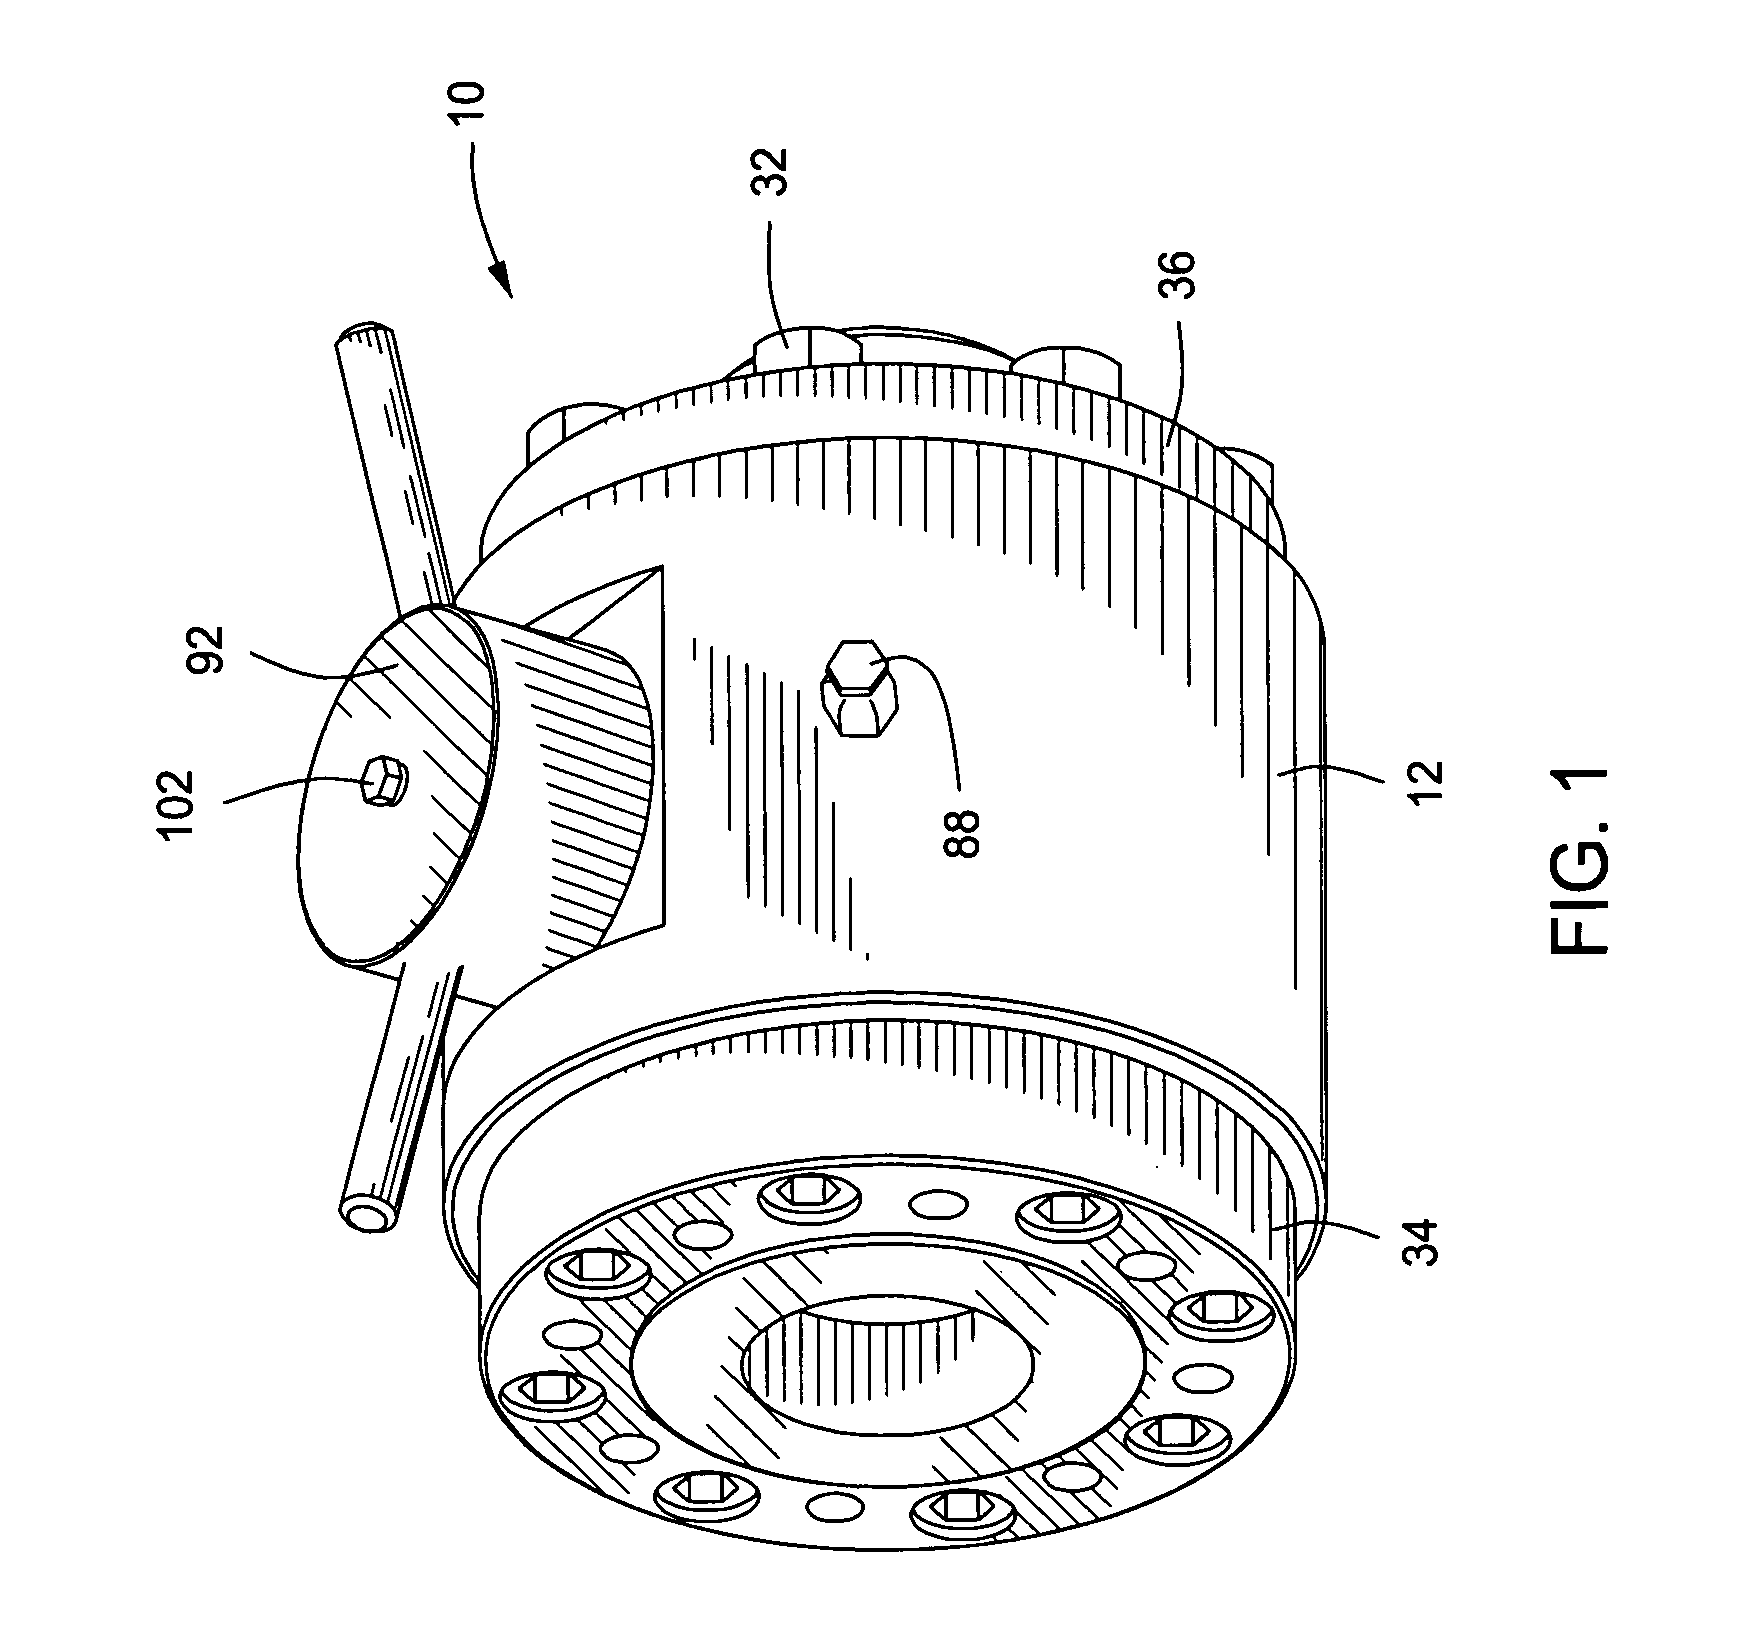 Pig valve having trunnion supported ball, self-centering seats and universal type mounting flanges